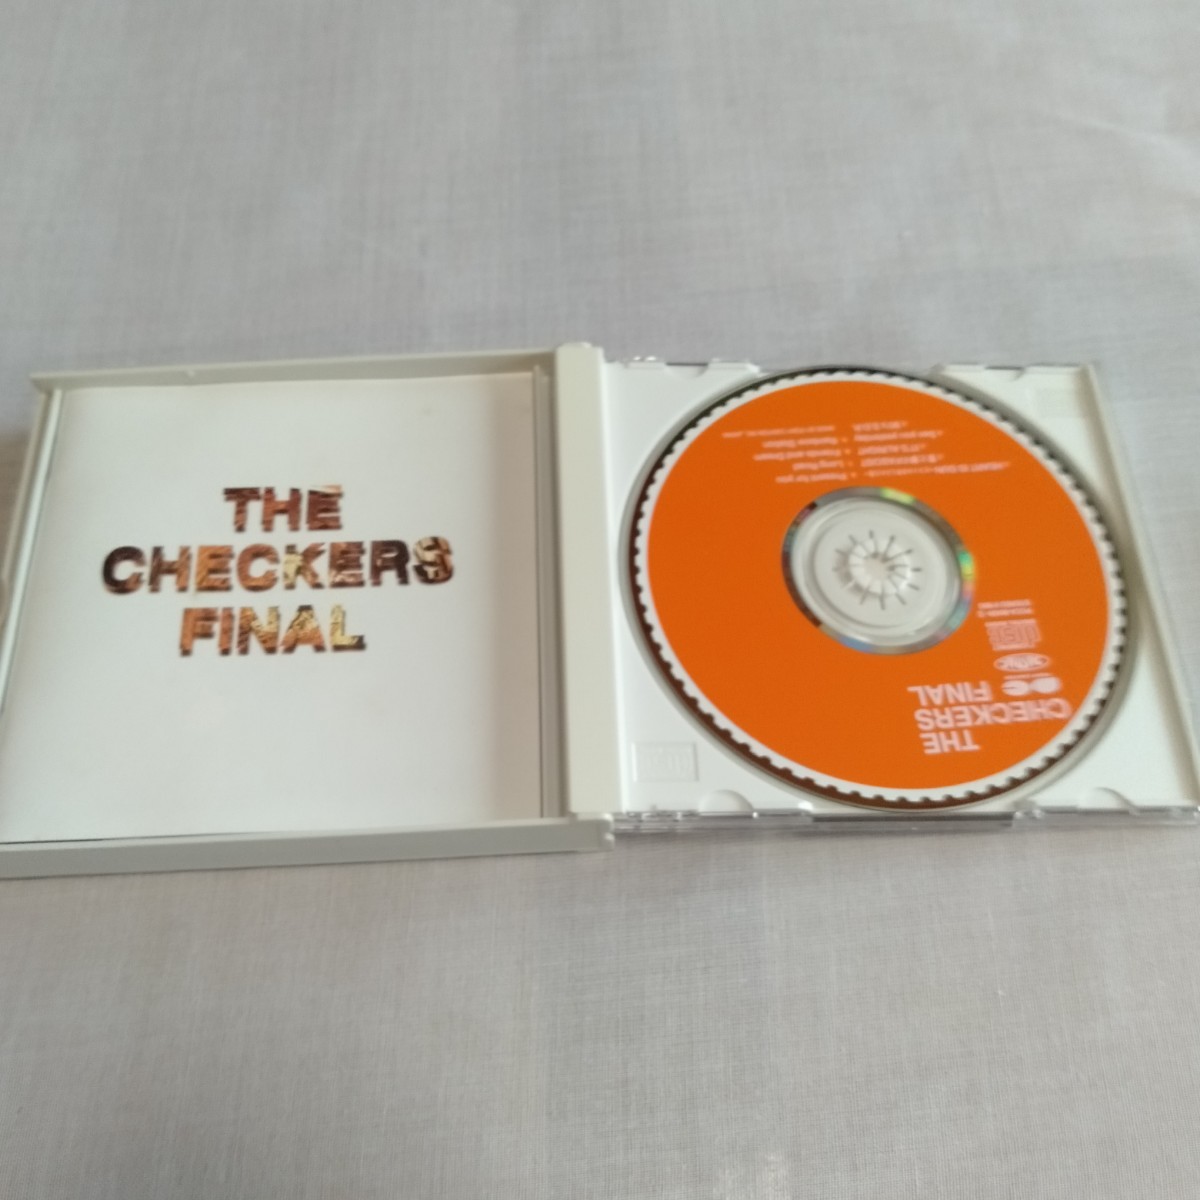 S156 The Checkers THE CHECKERS FINAL CD case condition A